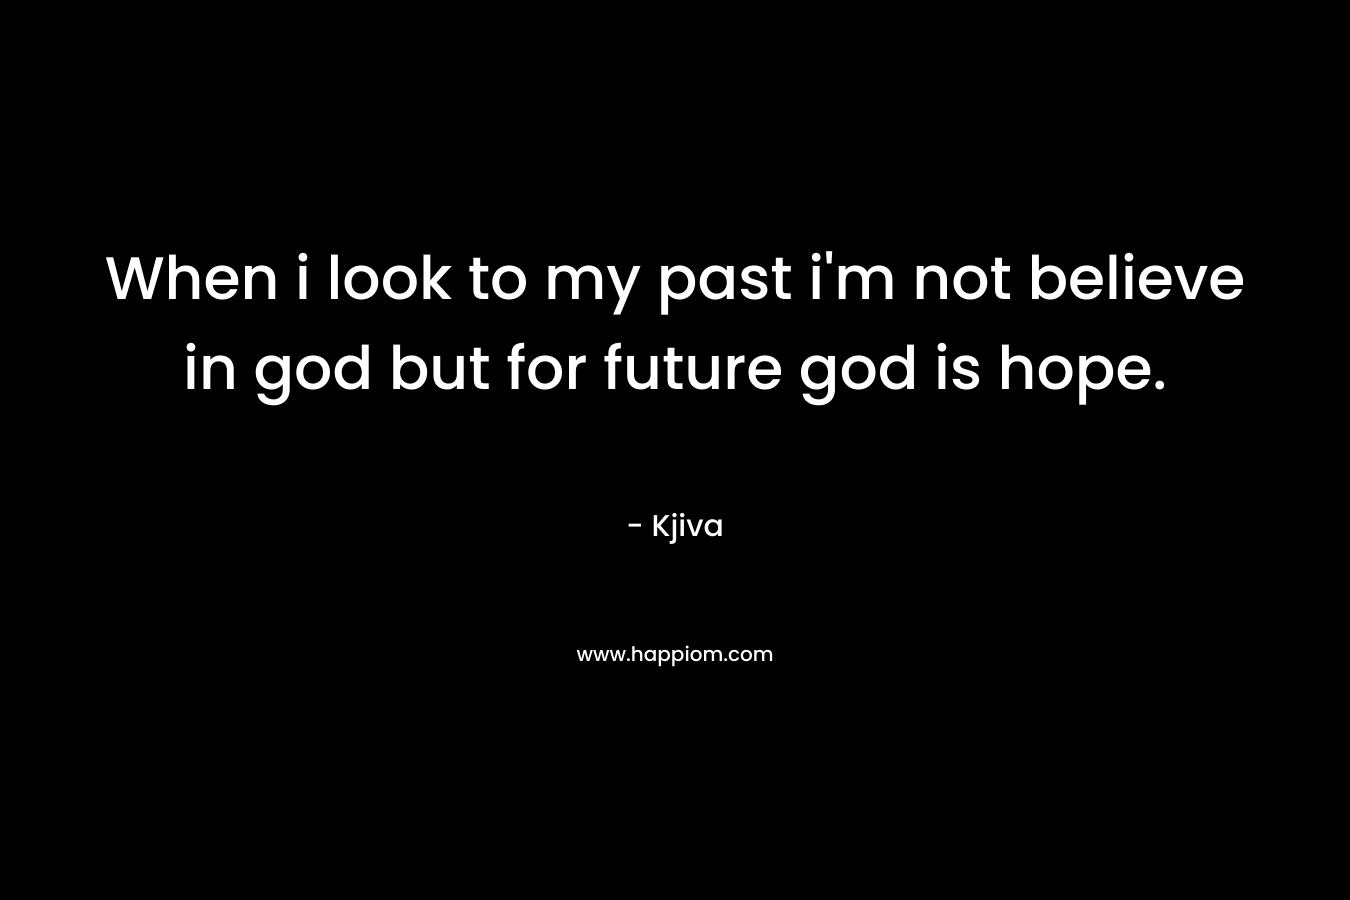 When i look to my past i'm not believe in god but for future god is hope.